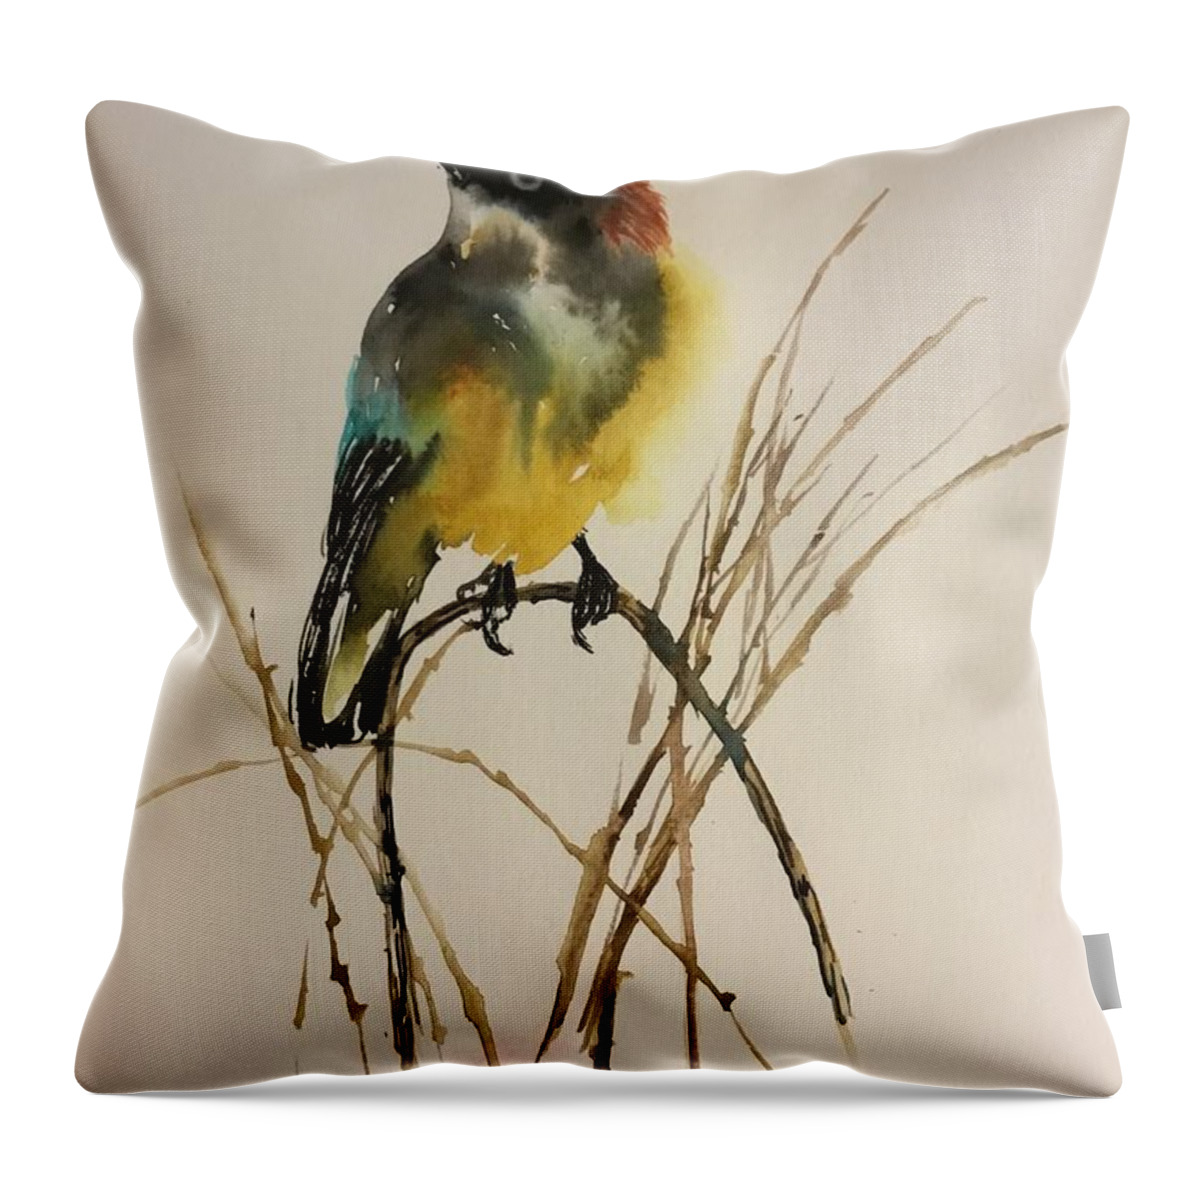 1912019 Throw Pillow featuring the painting 1912019 by Han in Huang wong